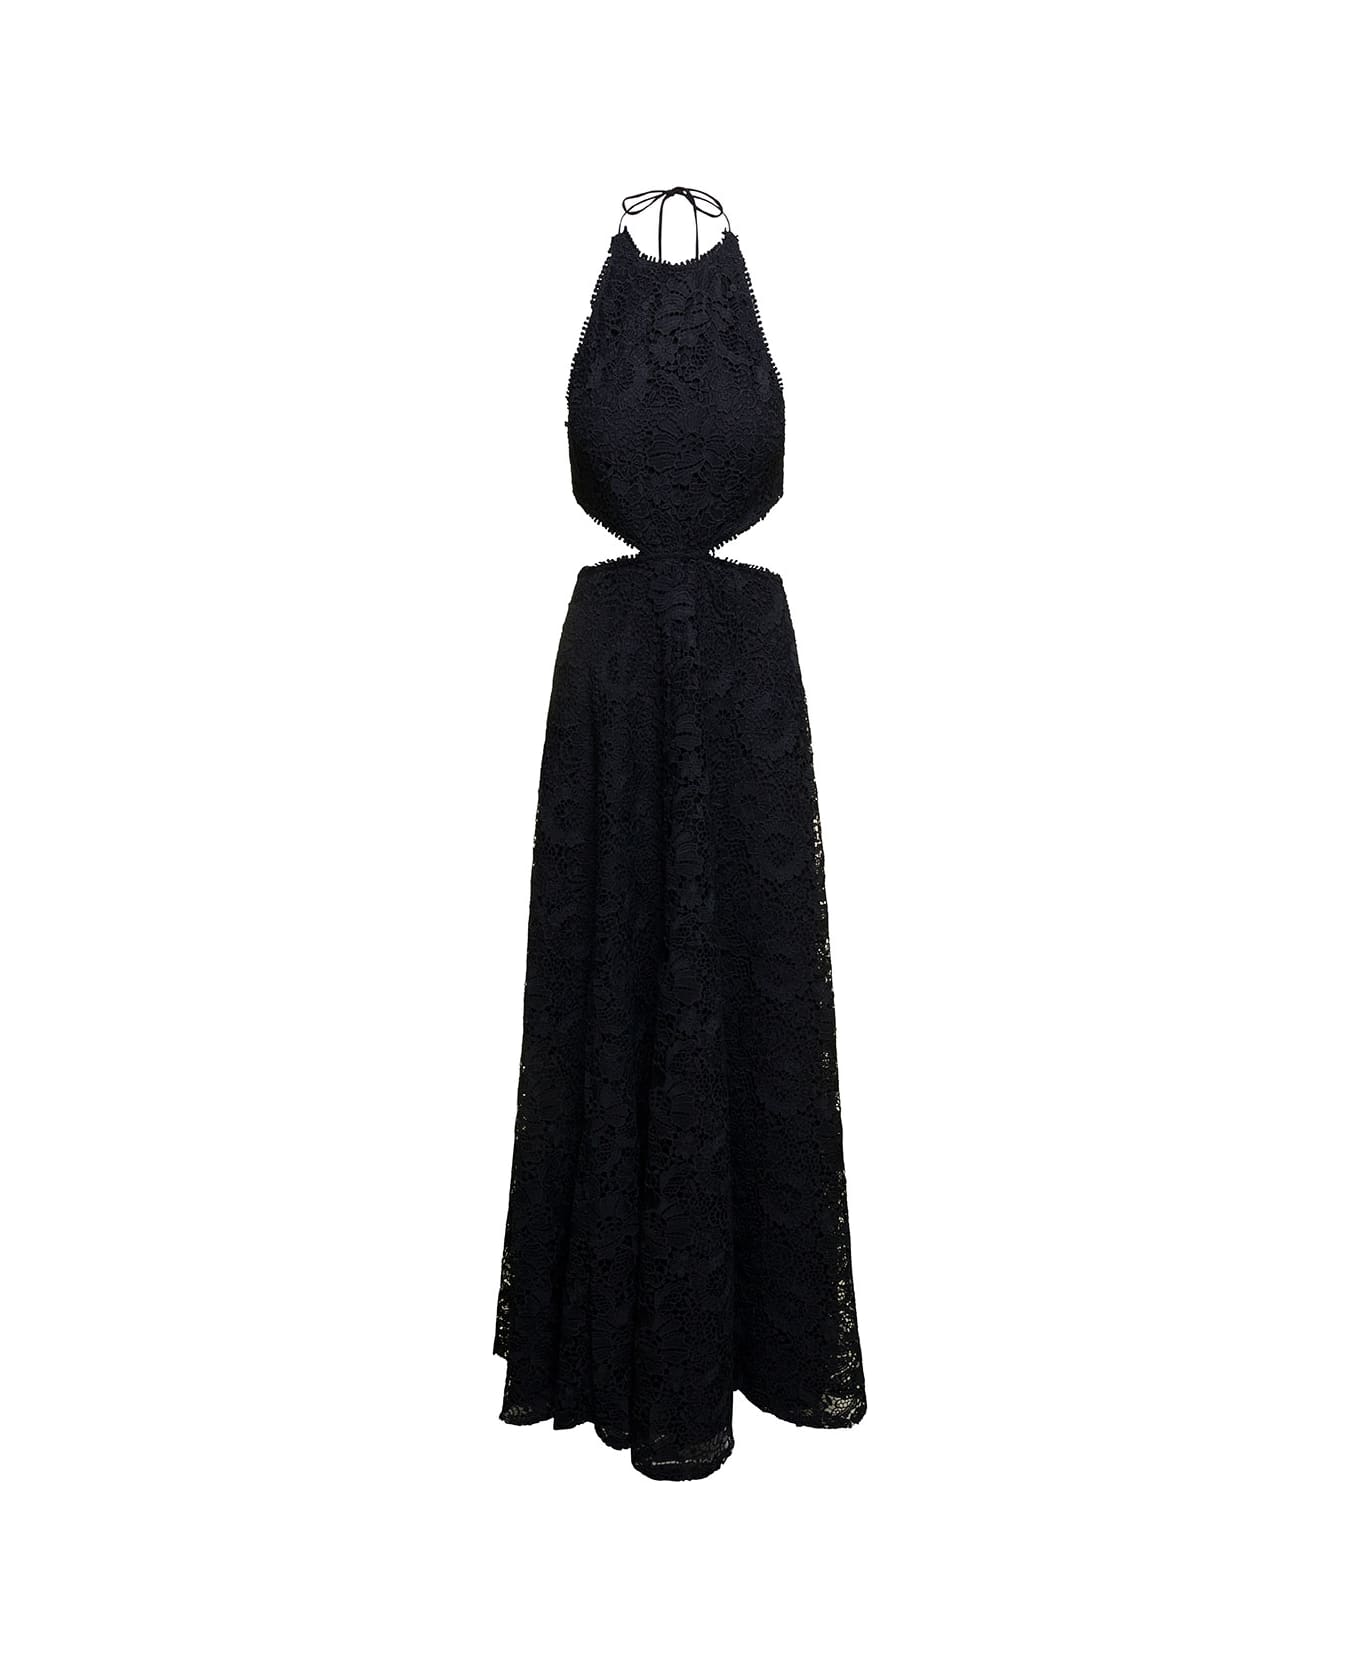 Sabina Musayev 'doro' Long Black Dress With Cut-out And Halter Neck In Lace Woman - Black ワンピース＆ドレス